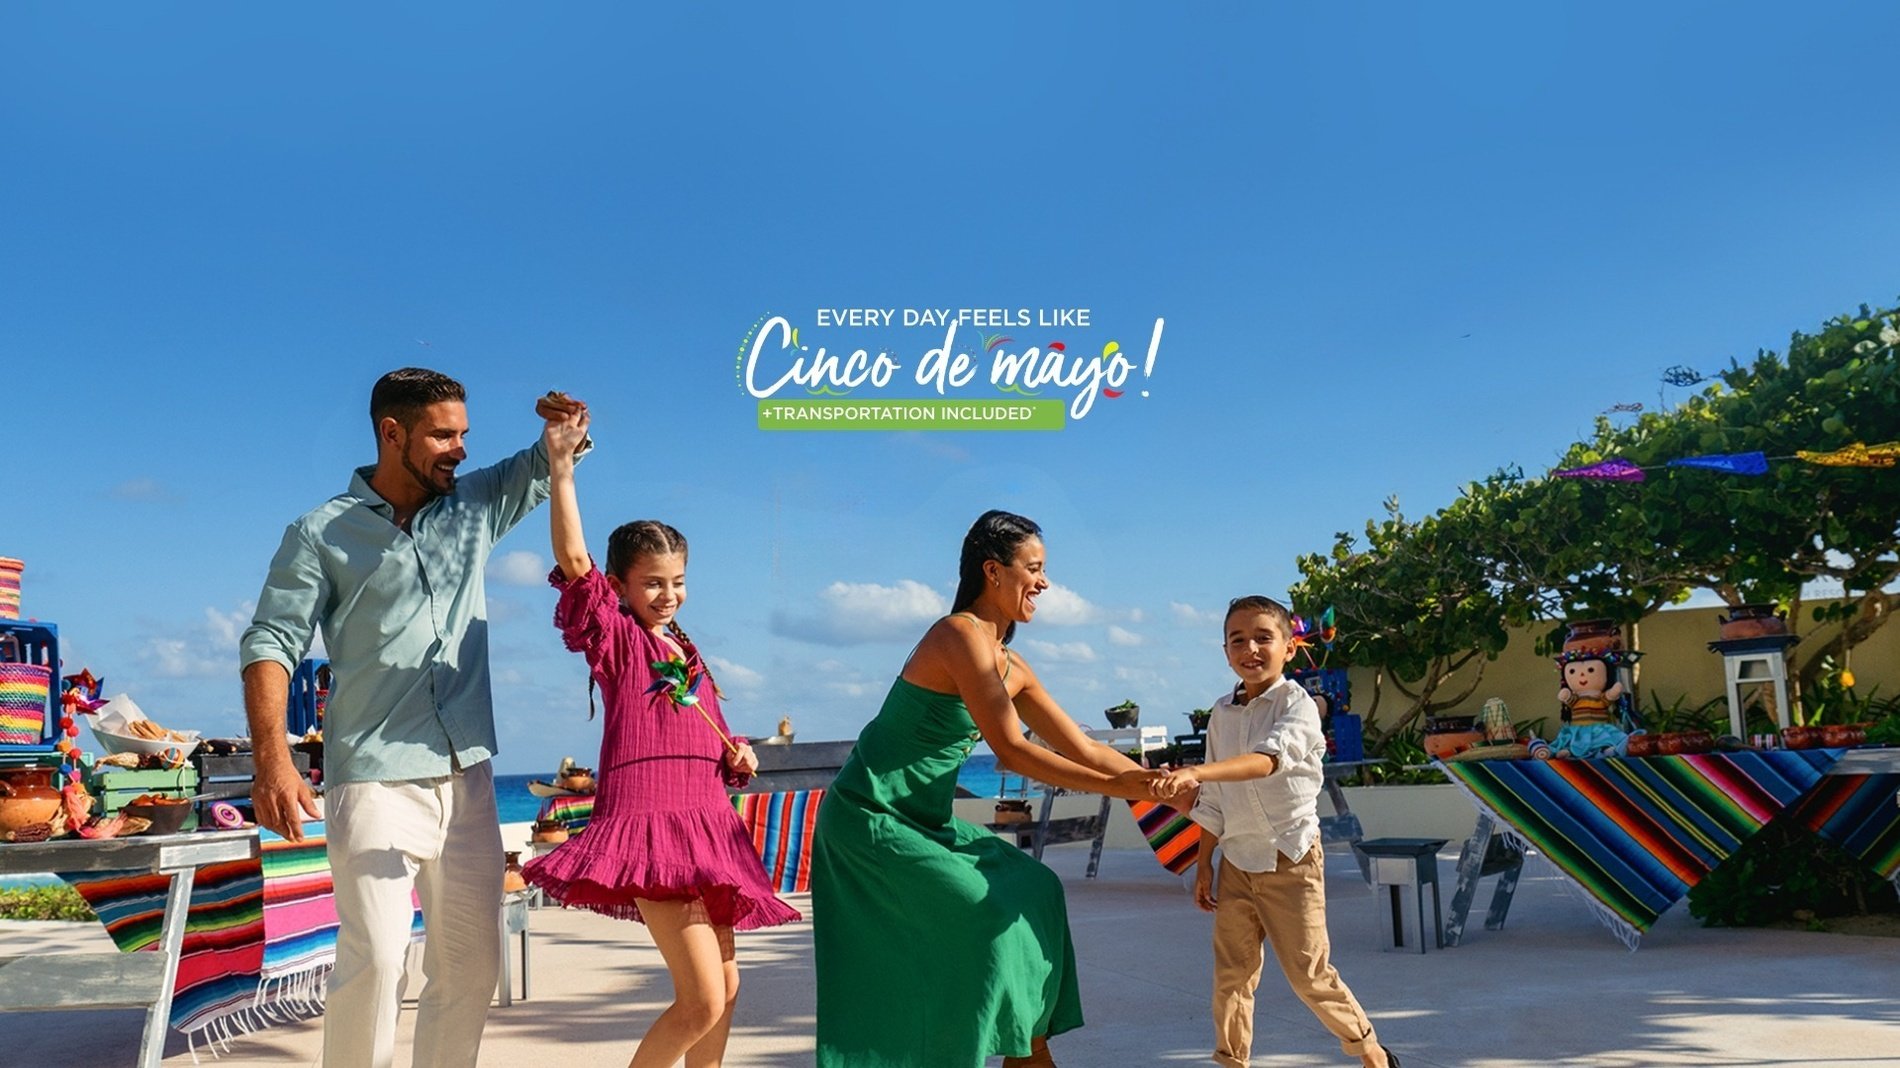 a family dancing in front of a sign that says " every day feels like cinco de mayo "